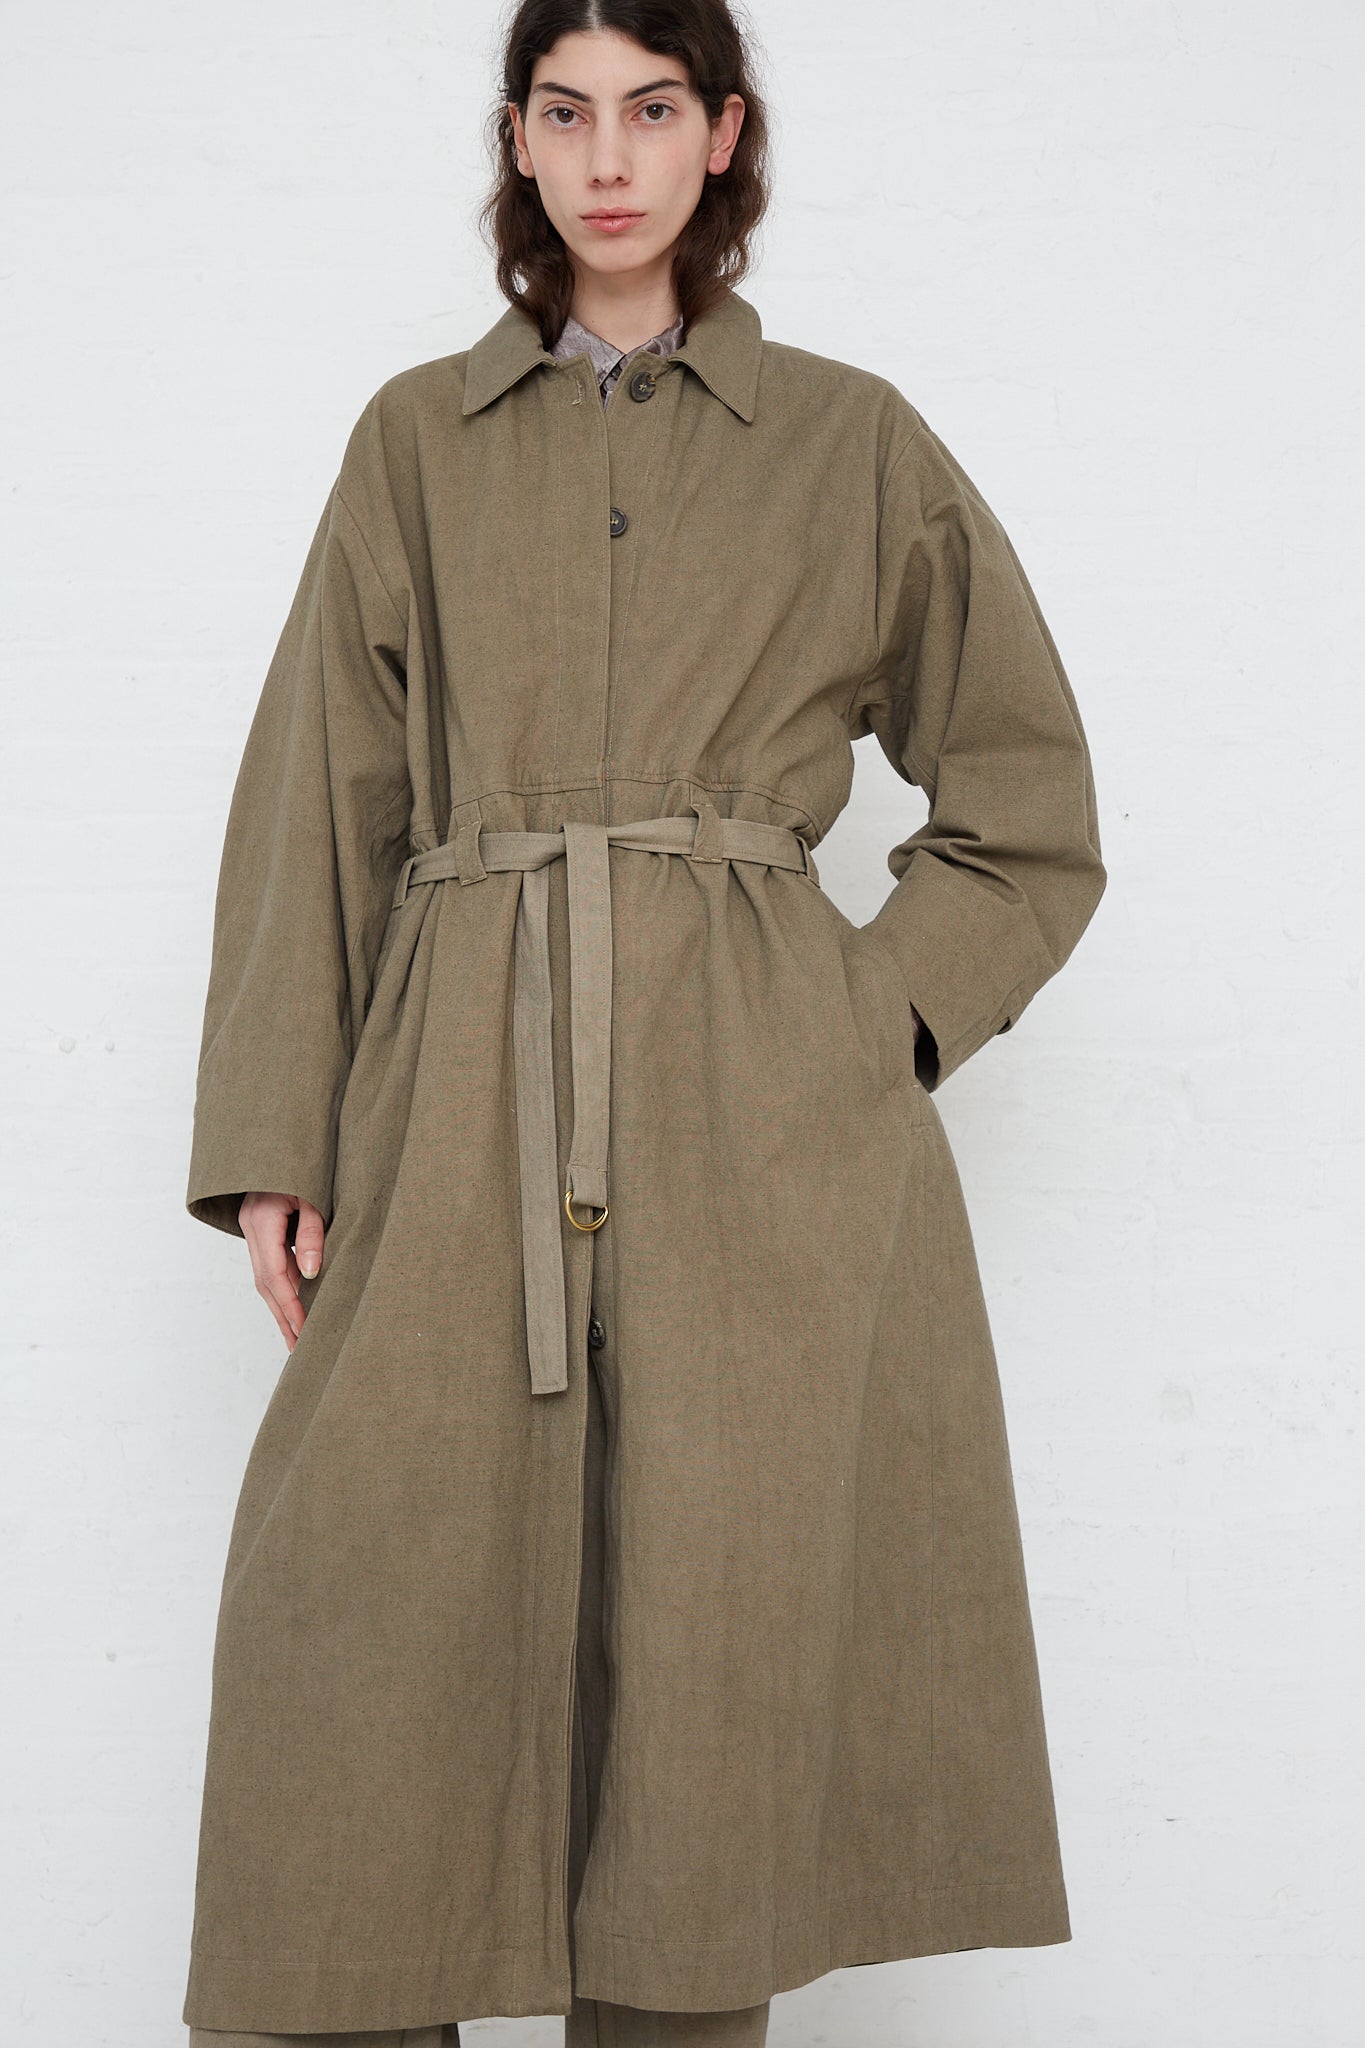 An oversized Lauren Manoogian Belted Trench in Fatigue made of soft canvas with adjustable cuffs.